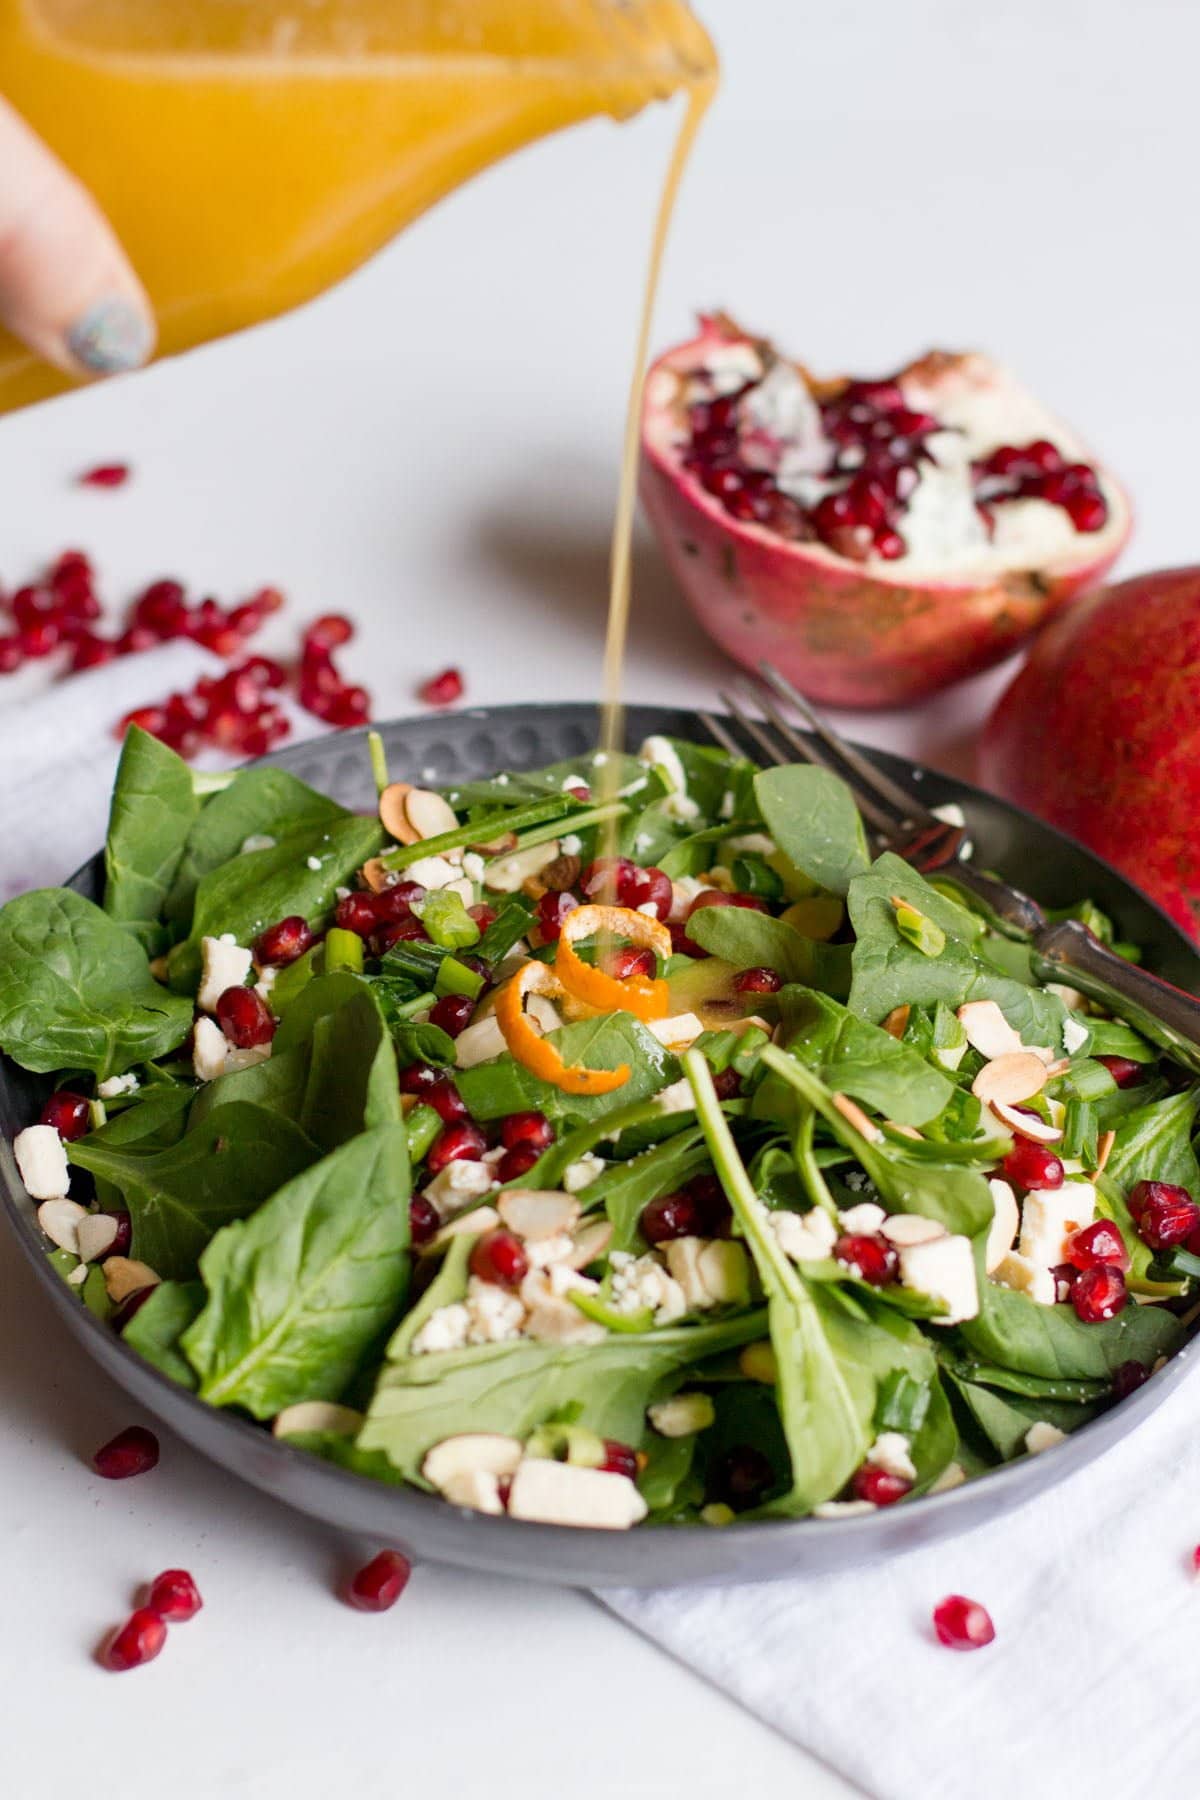 Pouring clementine vinaigrette over a baby spinach salad topped with sliced almonds and pomegranate arils.